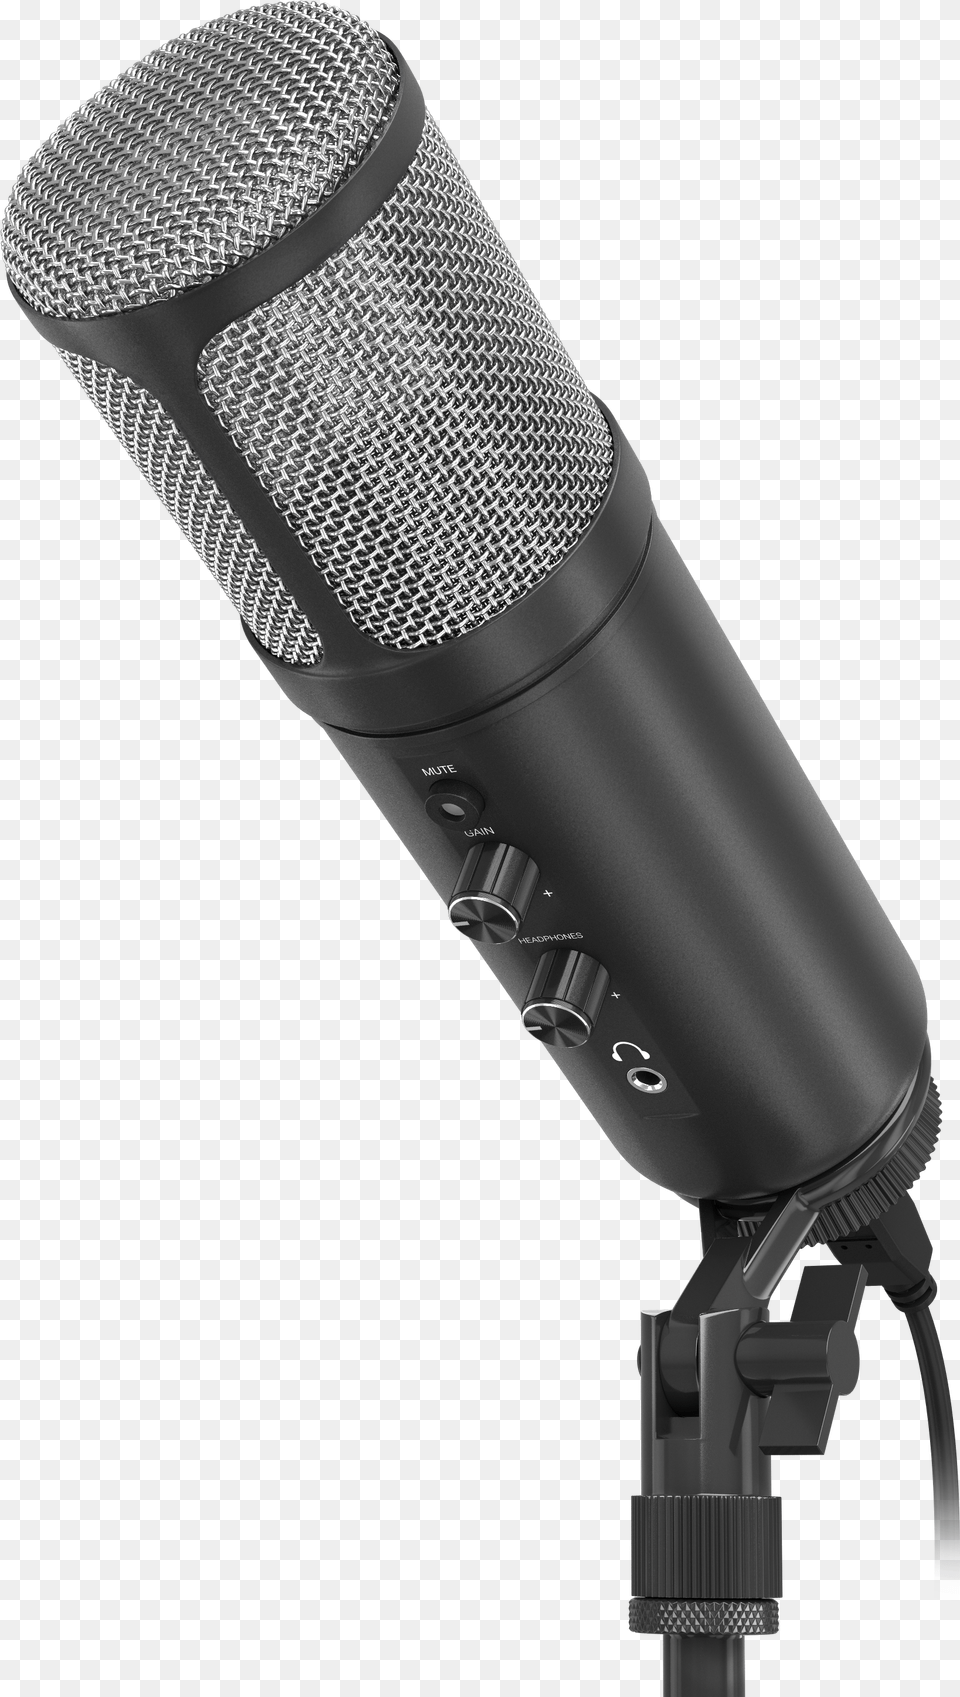 Genesis Radium, Electrical Device, Microphone, Appliance, Blow Dryer Png